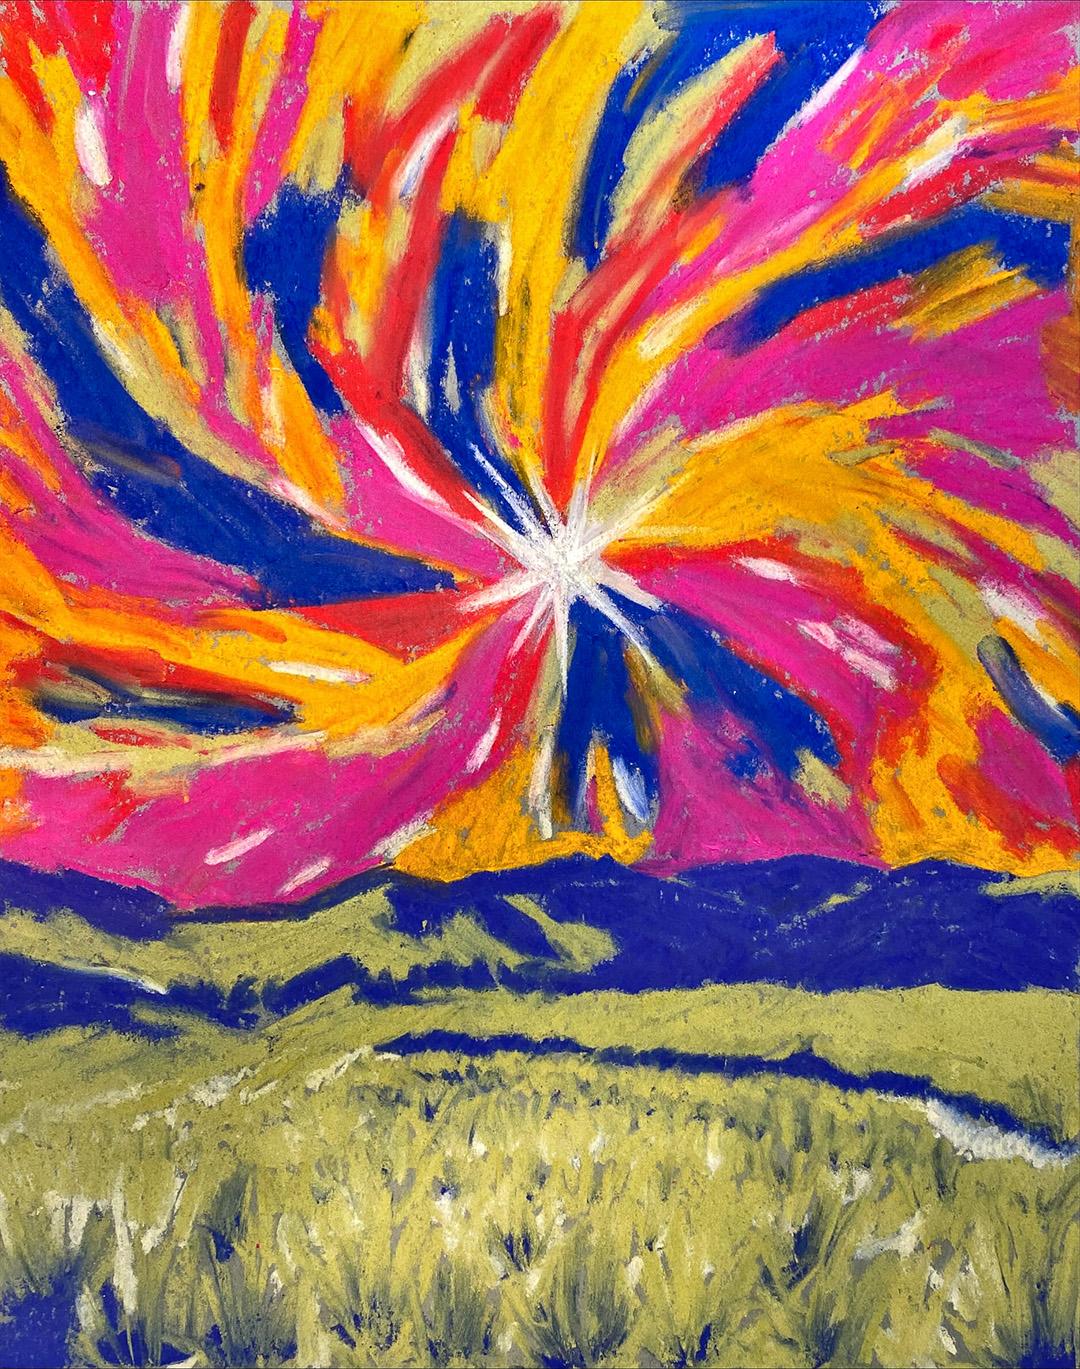 oil pastel art: grassy field, hills in the distance, bright swirling starburst filling the sky